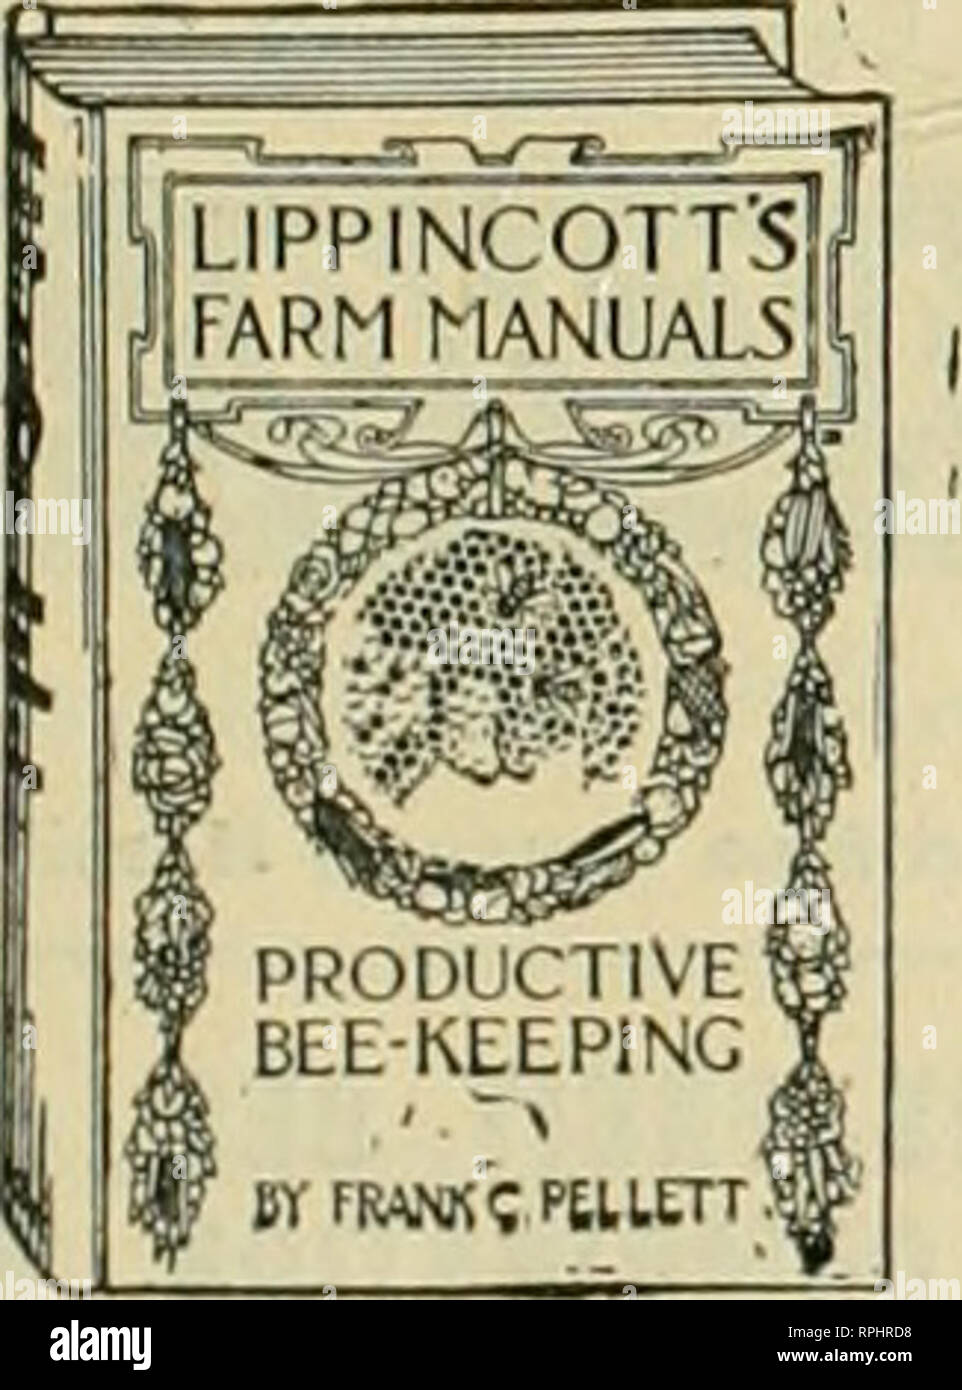 American bee journal. Bee culture; Bees. PATENTED WRIGHTS FRAME ...